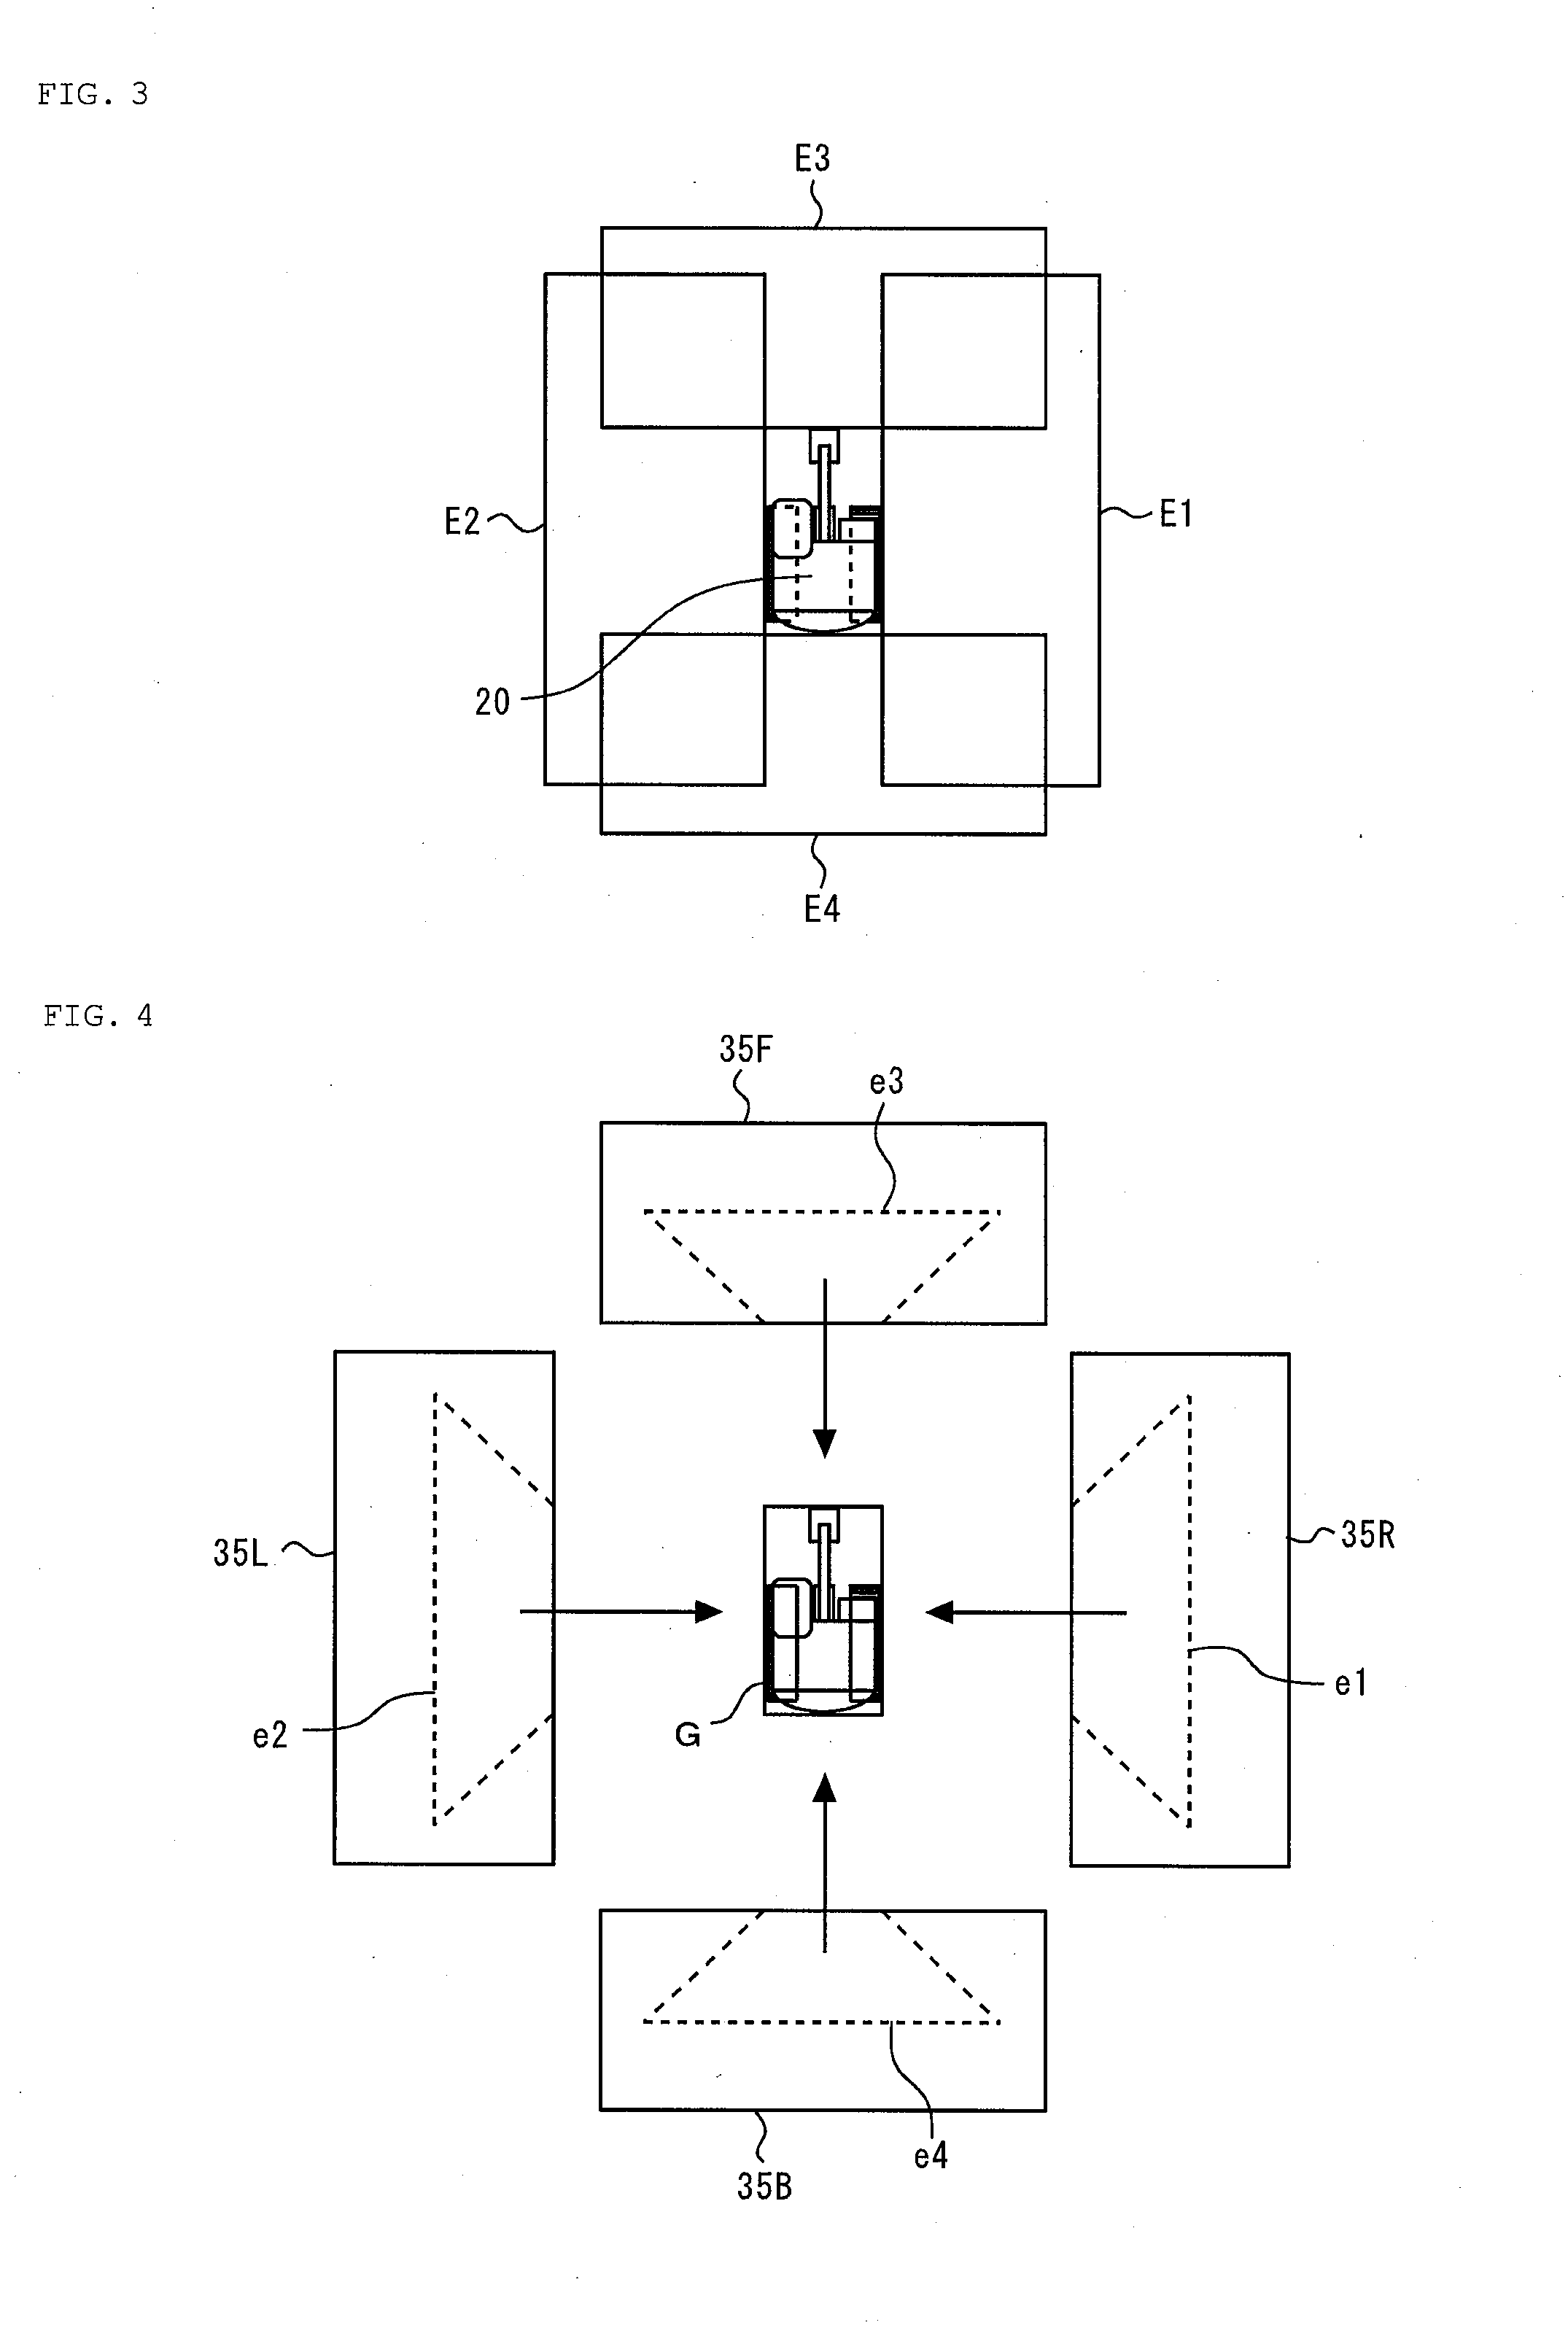 Environment monitoring device for operating machinery